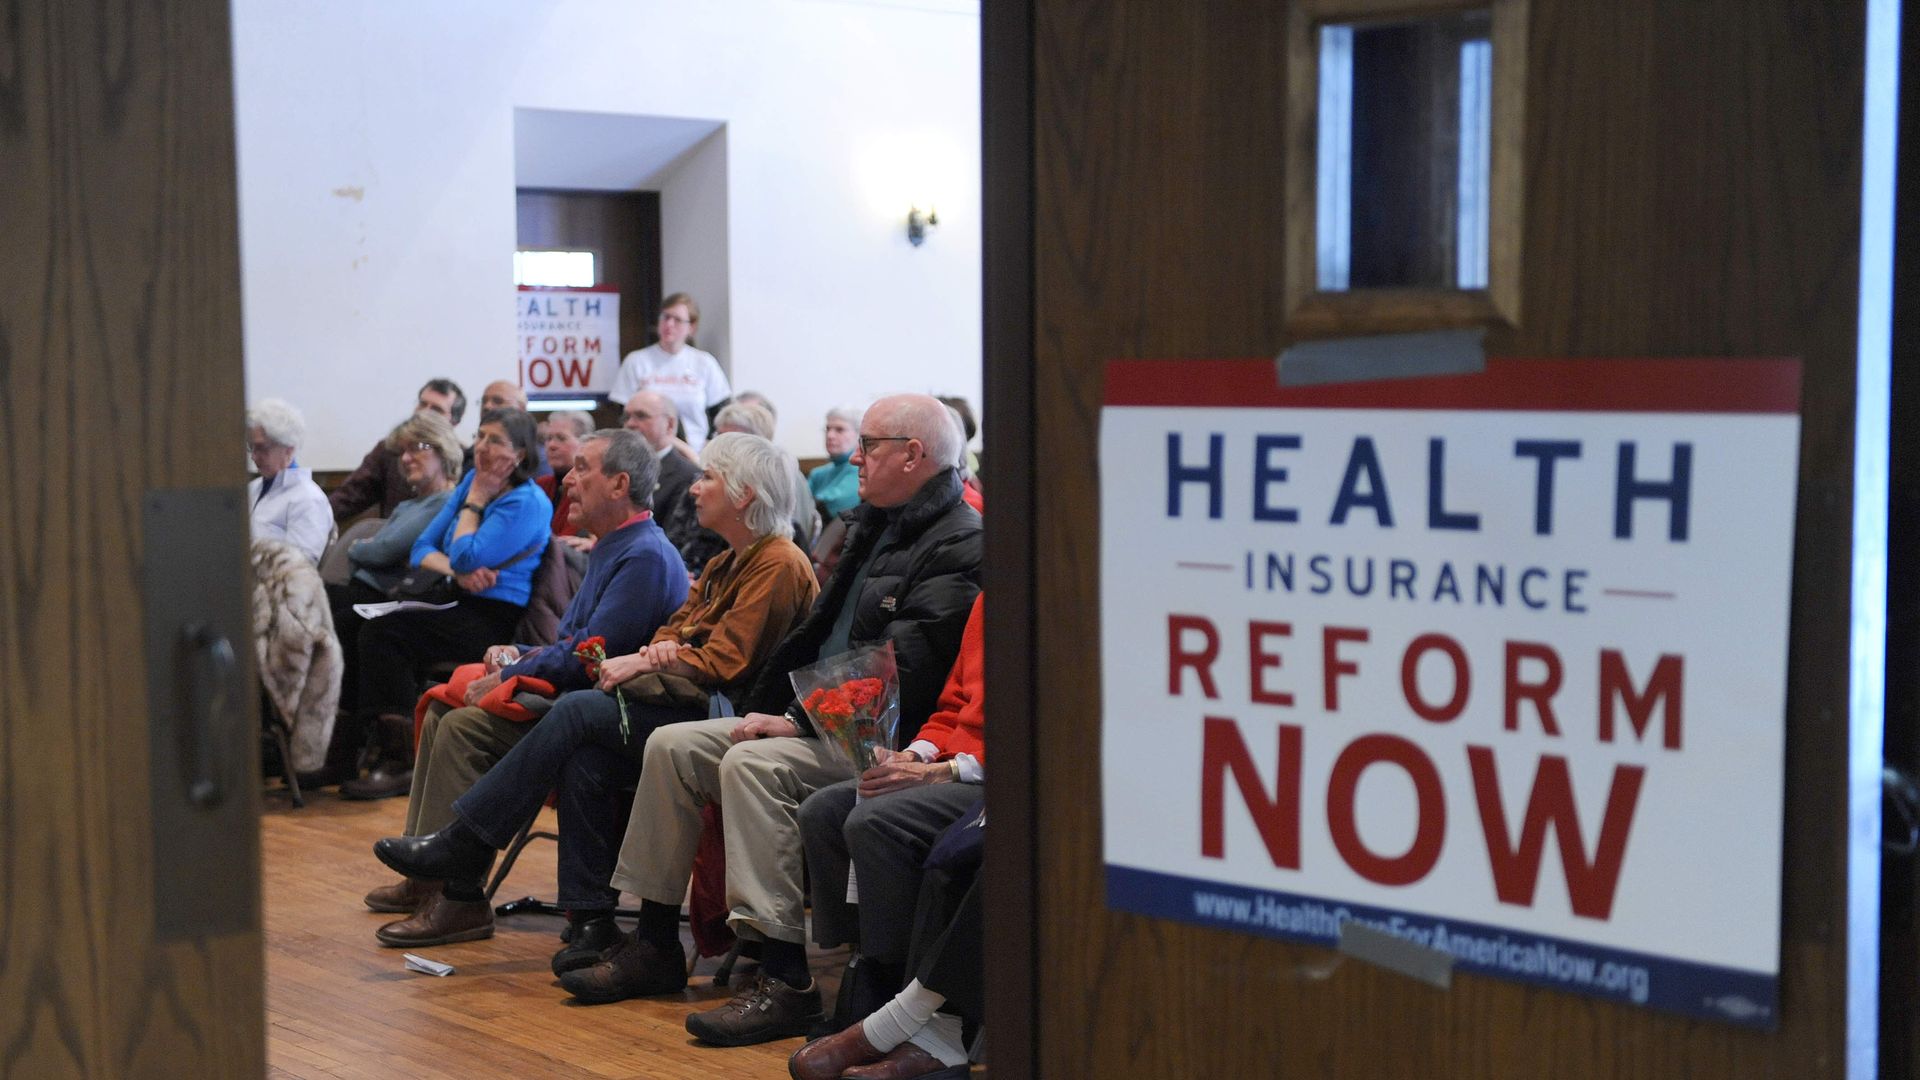 People listening in on health insurance reform